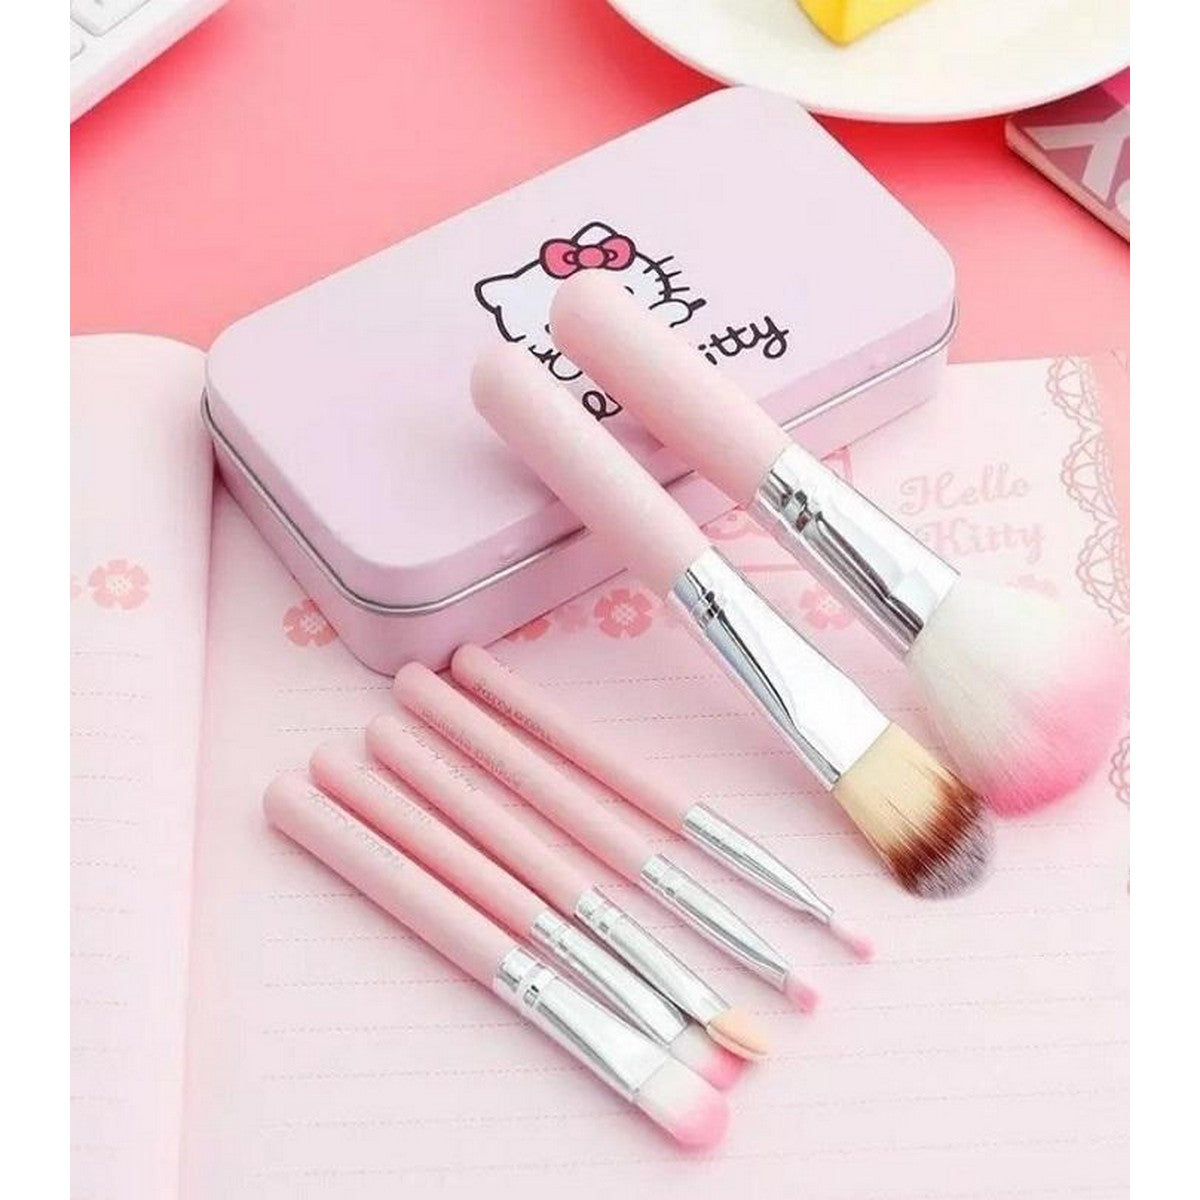 (Pack of 2) Hello Kitty Complete Makeup Mini Brush Kit with A Storage Box – Set of 7 Pieces